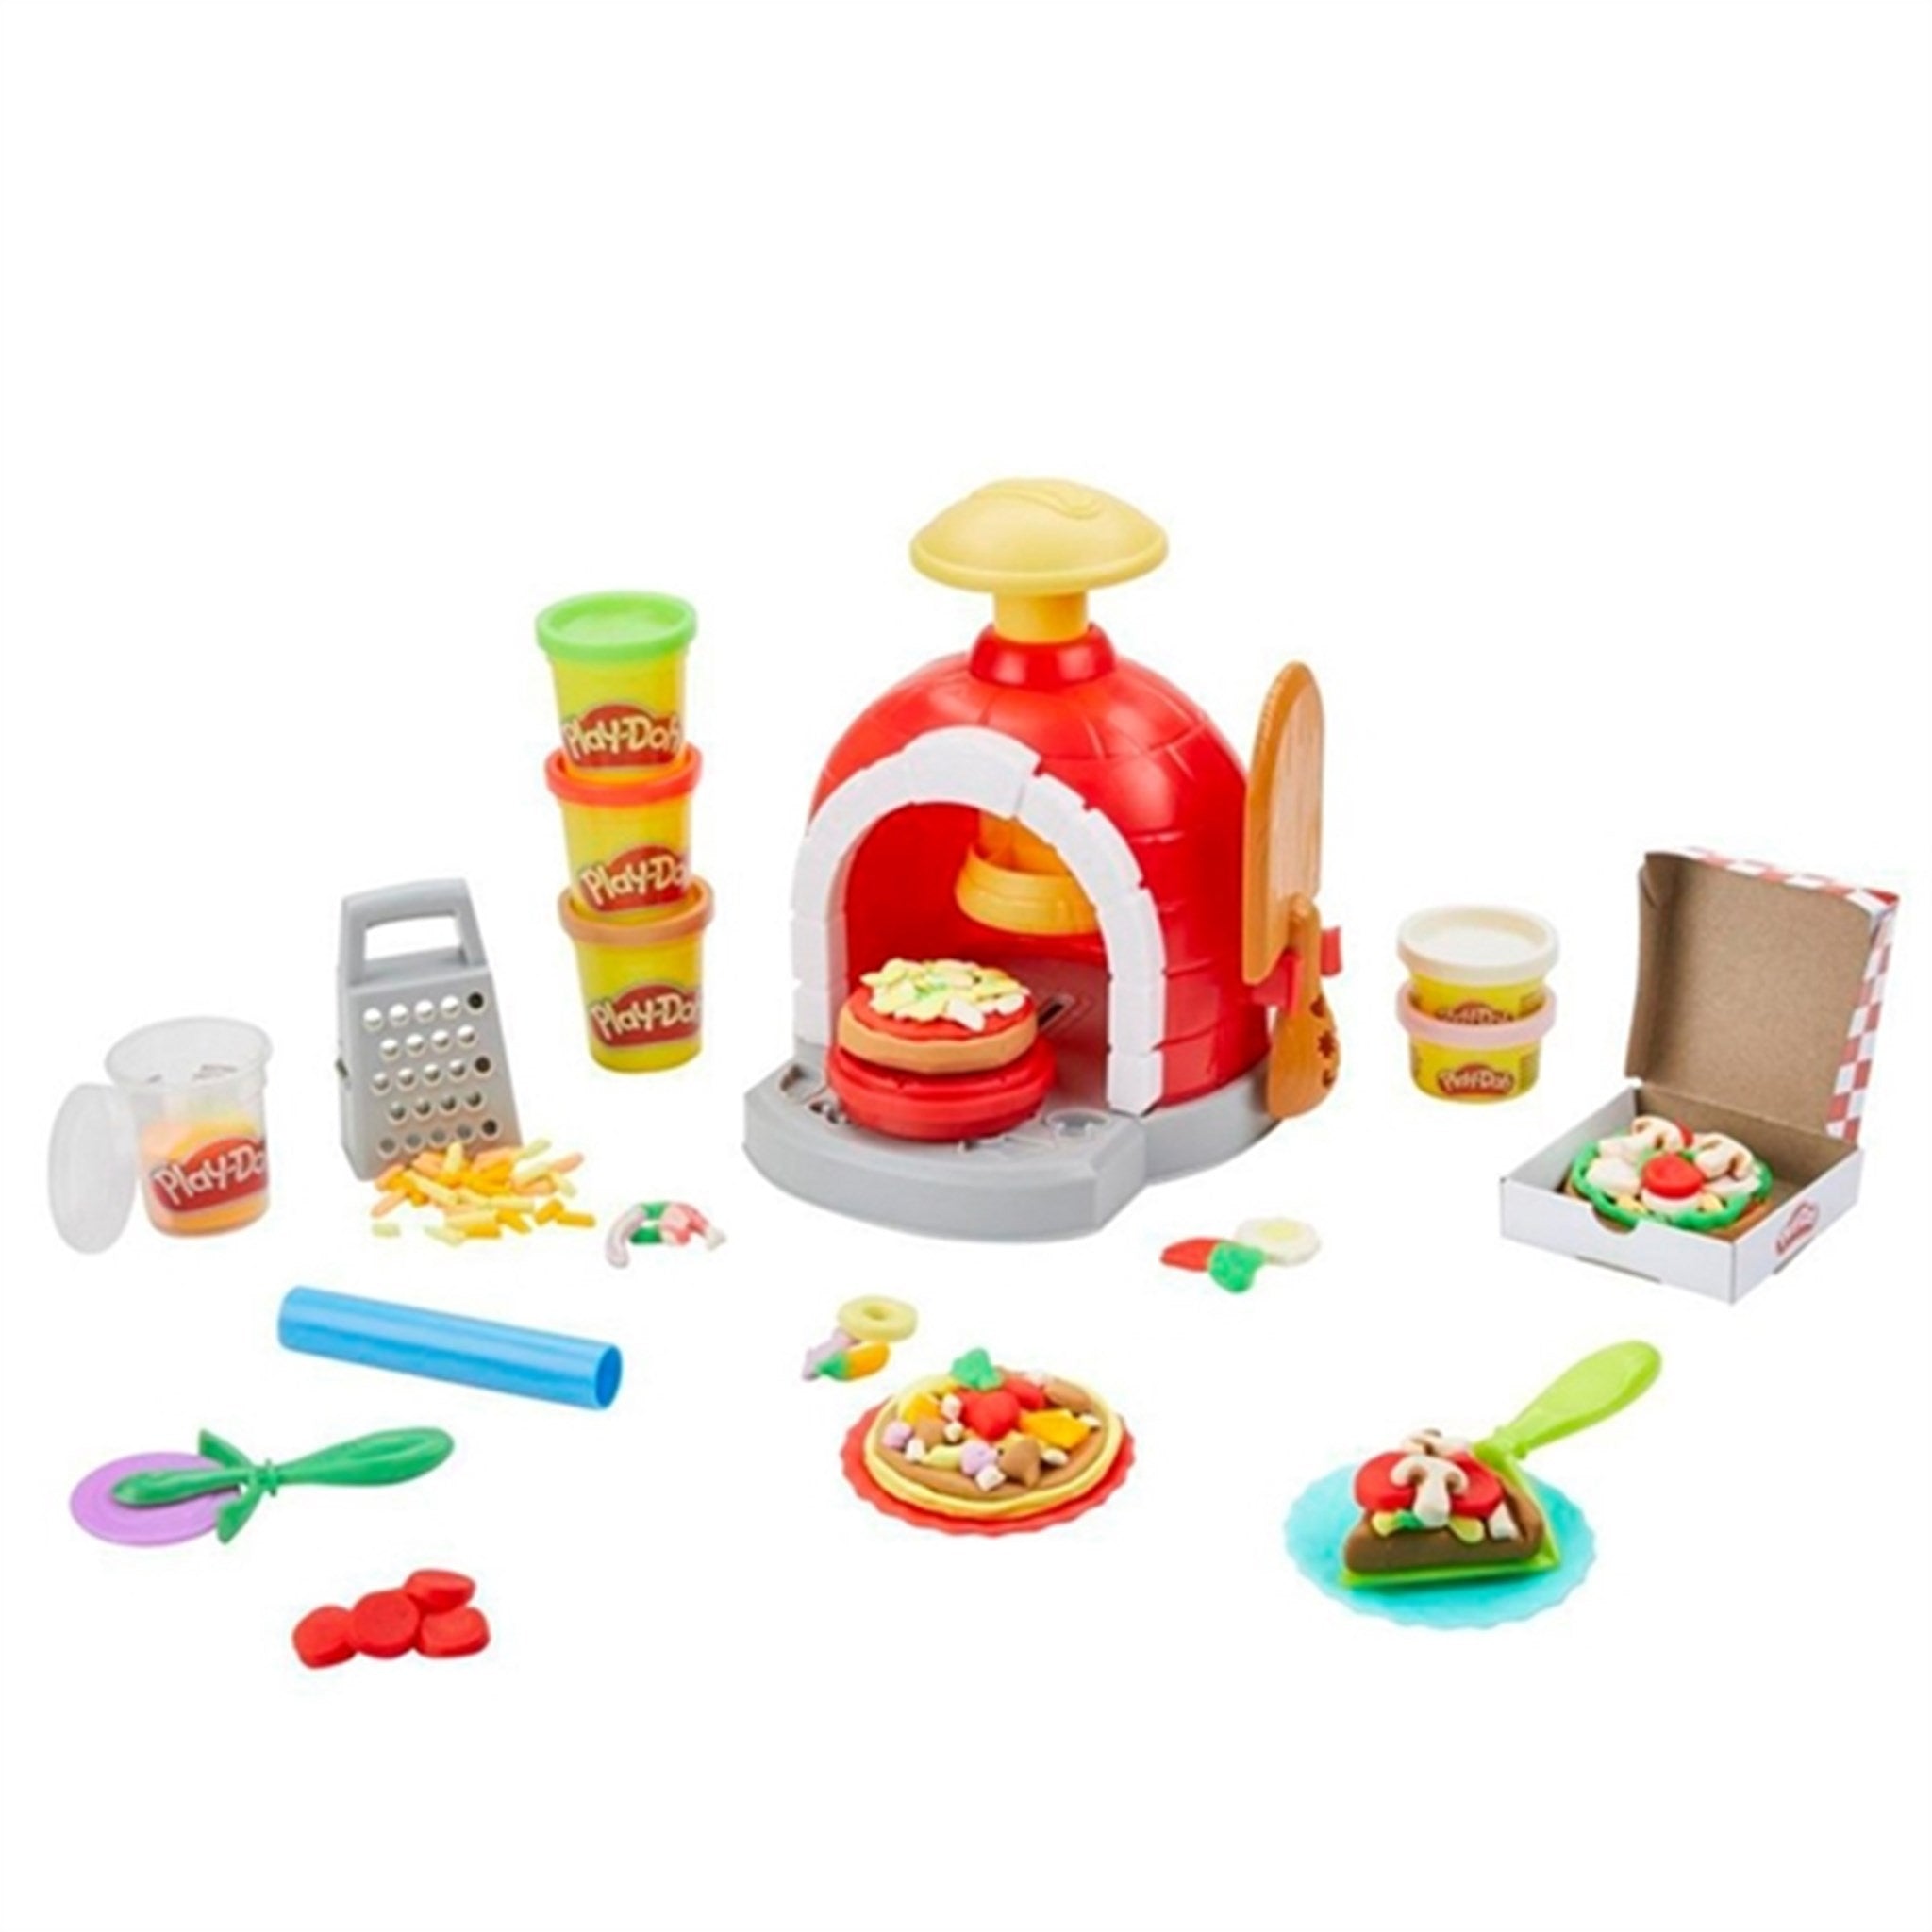 Play-Doh Kitchen Creation - Pizza Oven Playset